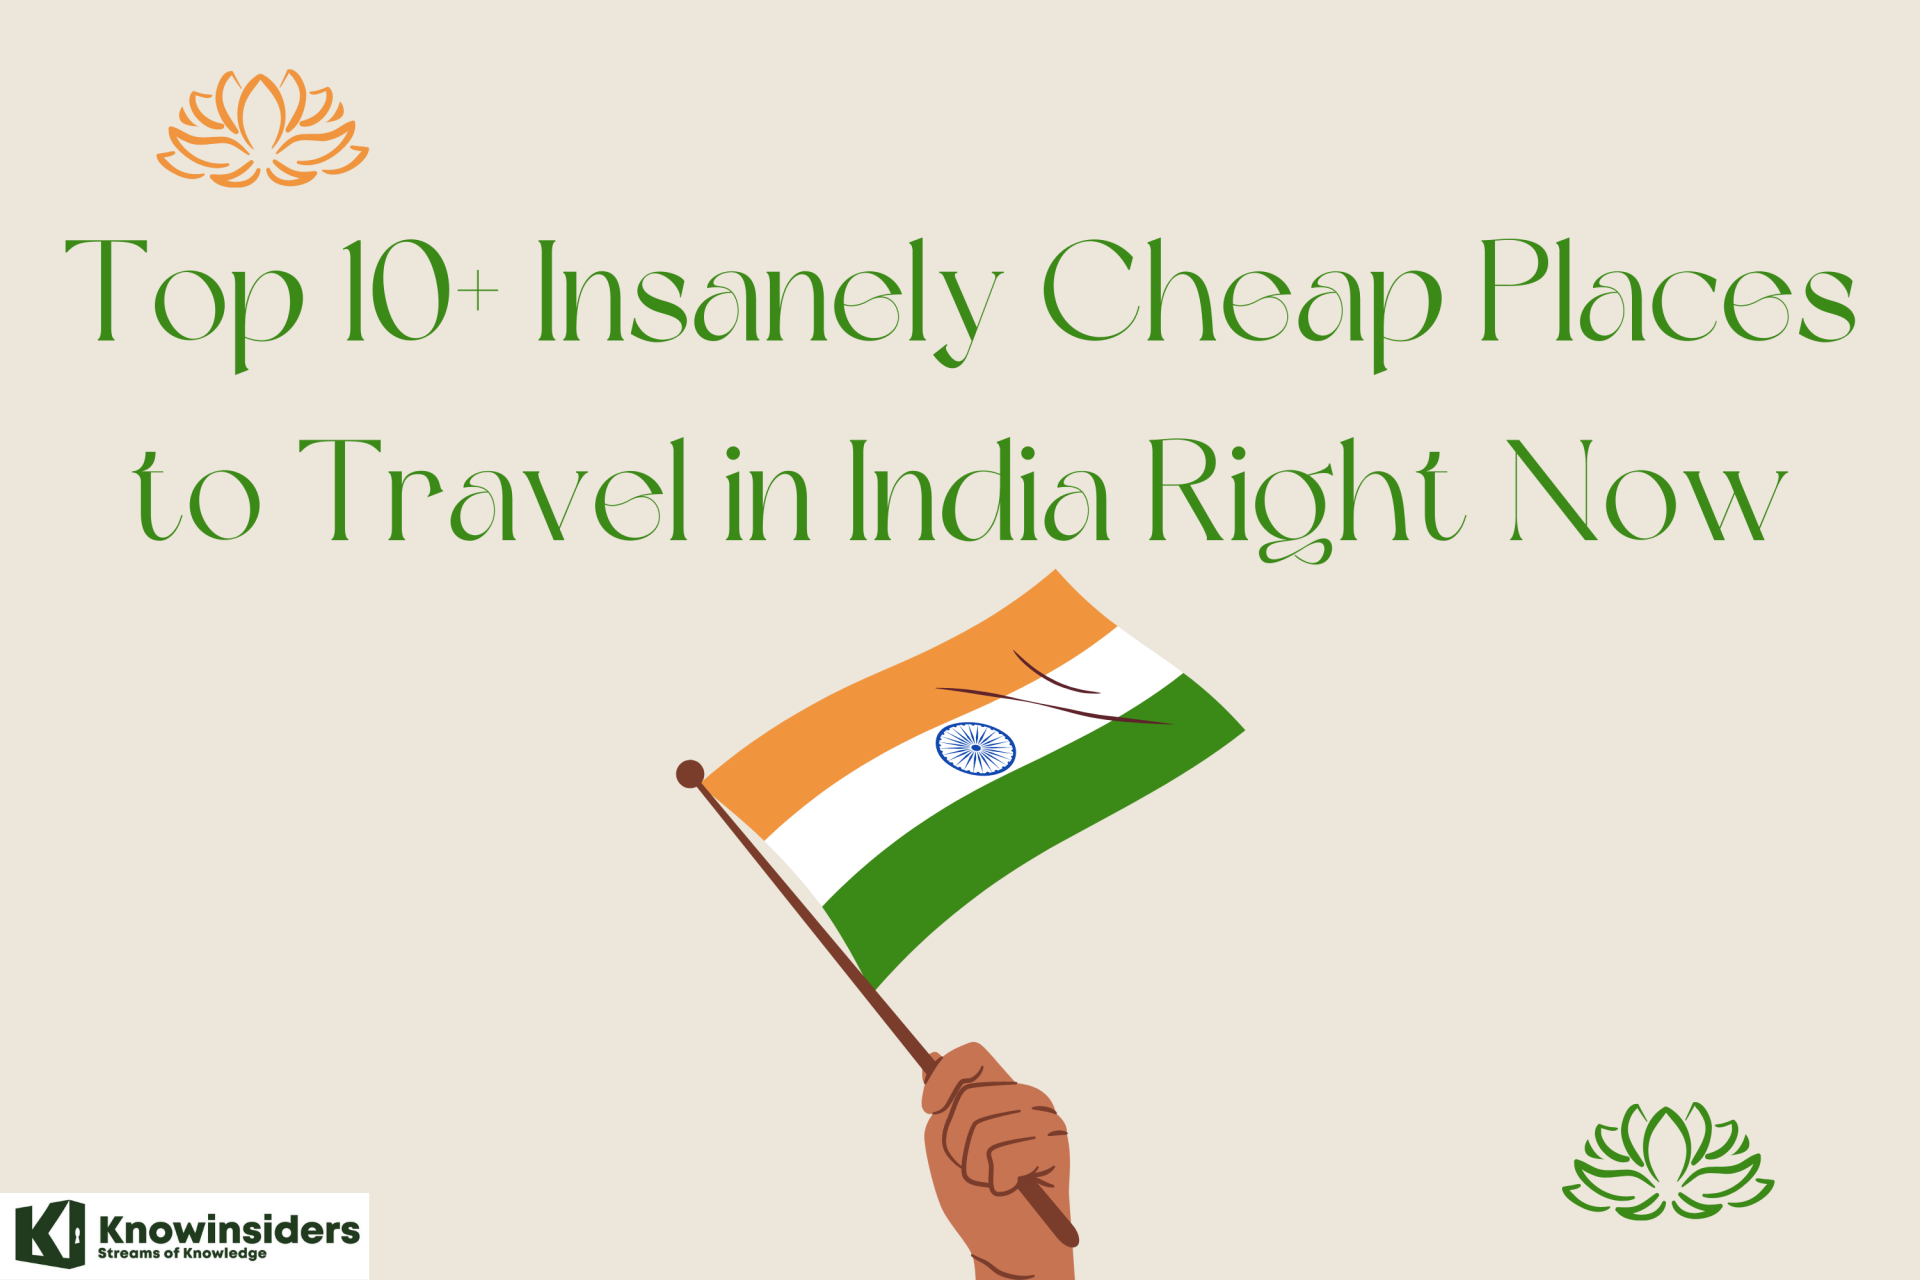 Top 10+ Insanely Cheap Places to Travel in India